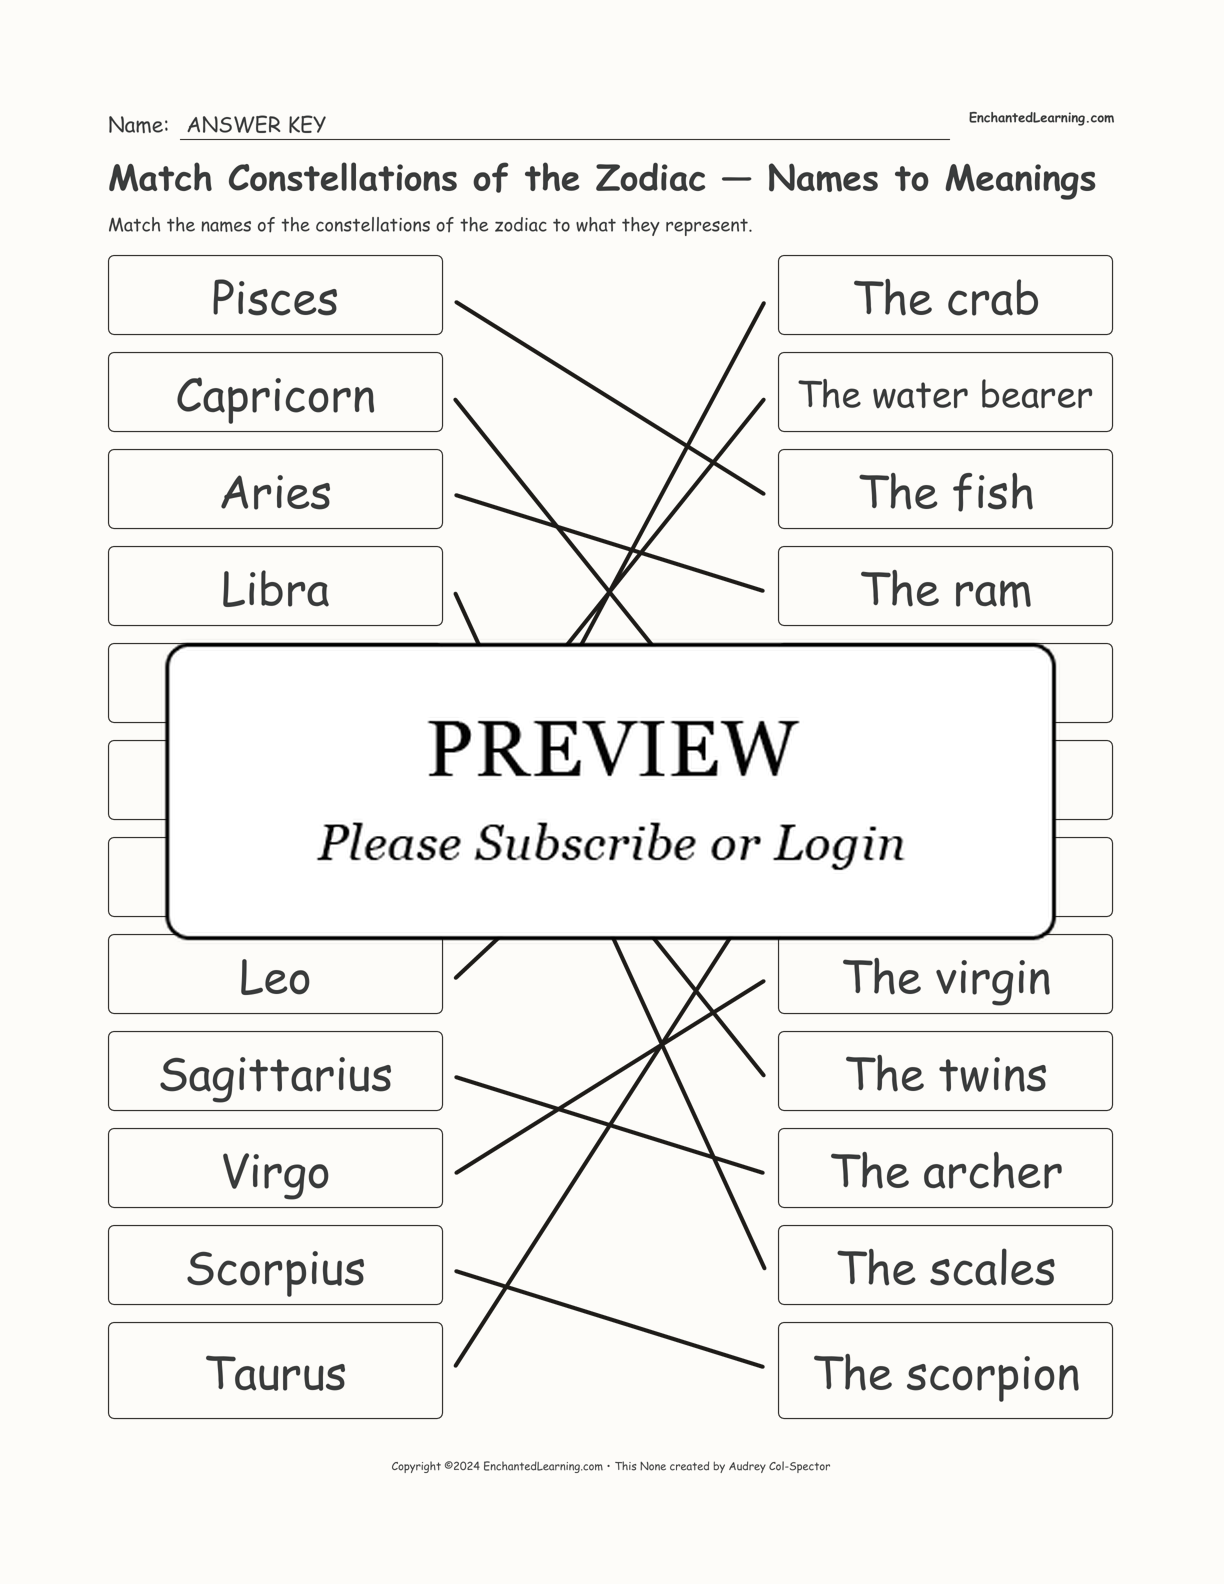 Match Constellations of the Zodiac — Names to Meanings interactive worksheet page 2